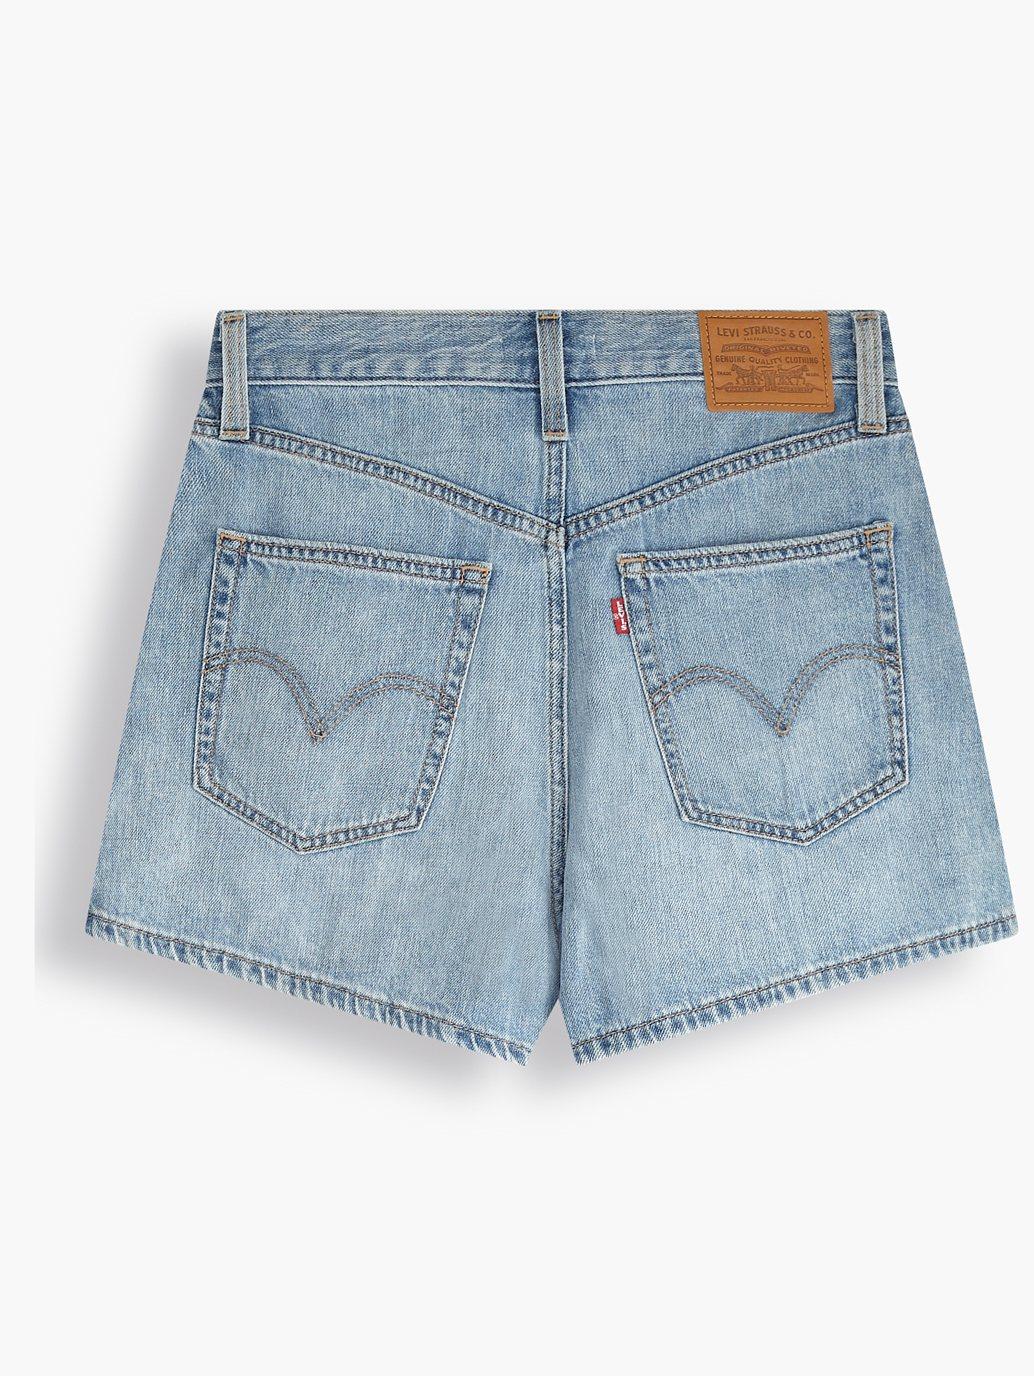 levis malaysia womens high loose shorts 394510009 22 Details